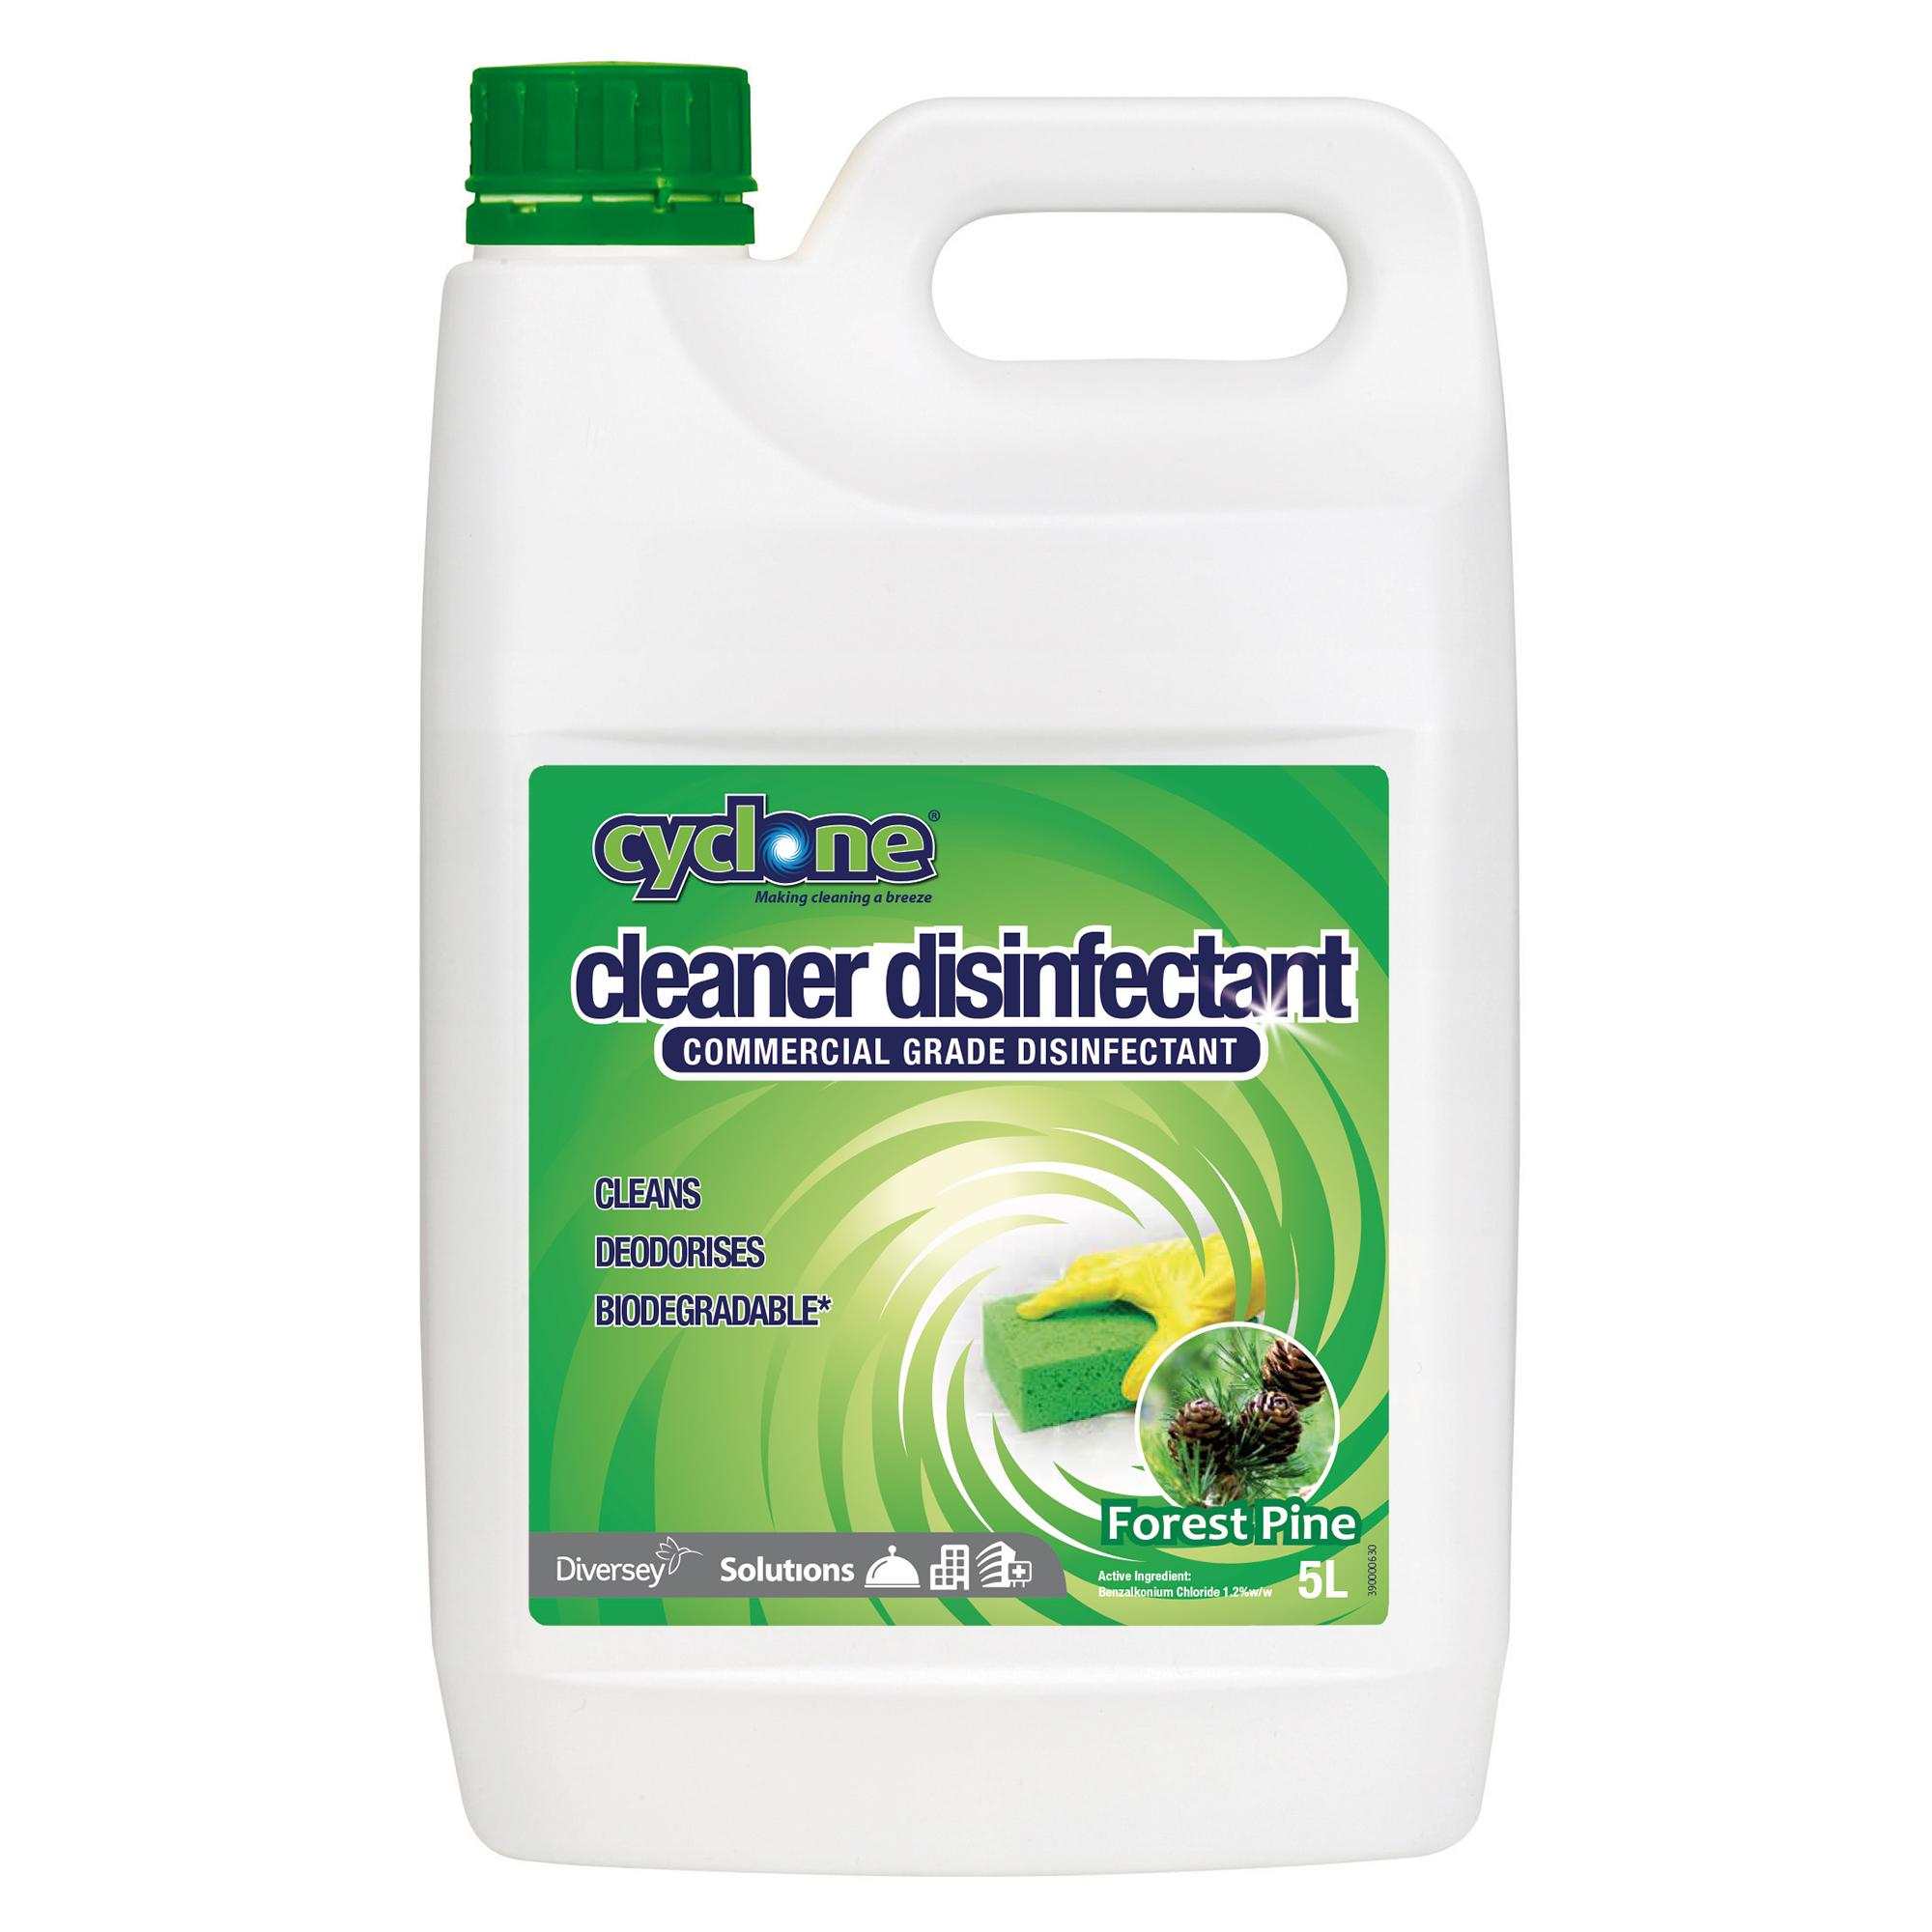 5385579%20Cyclone%20Cleaner%20Disinfectant%20Com.%20Grade%20NZ%20_%205L%202000x2000px.jpg